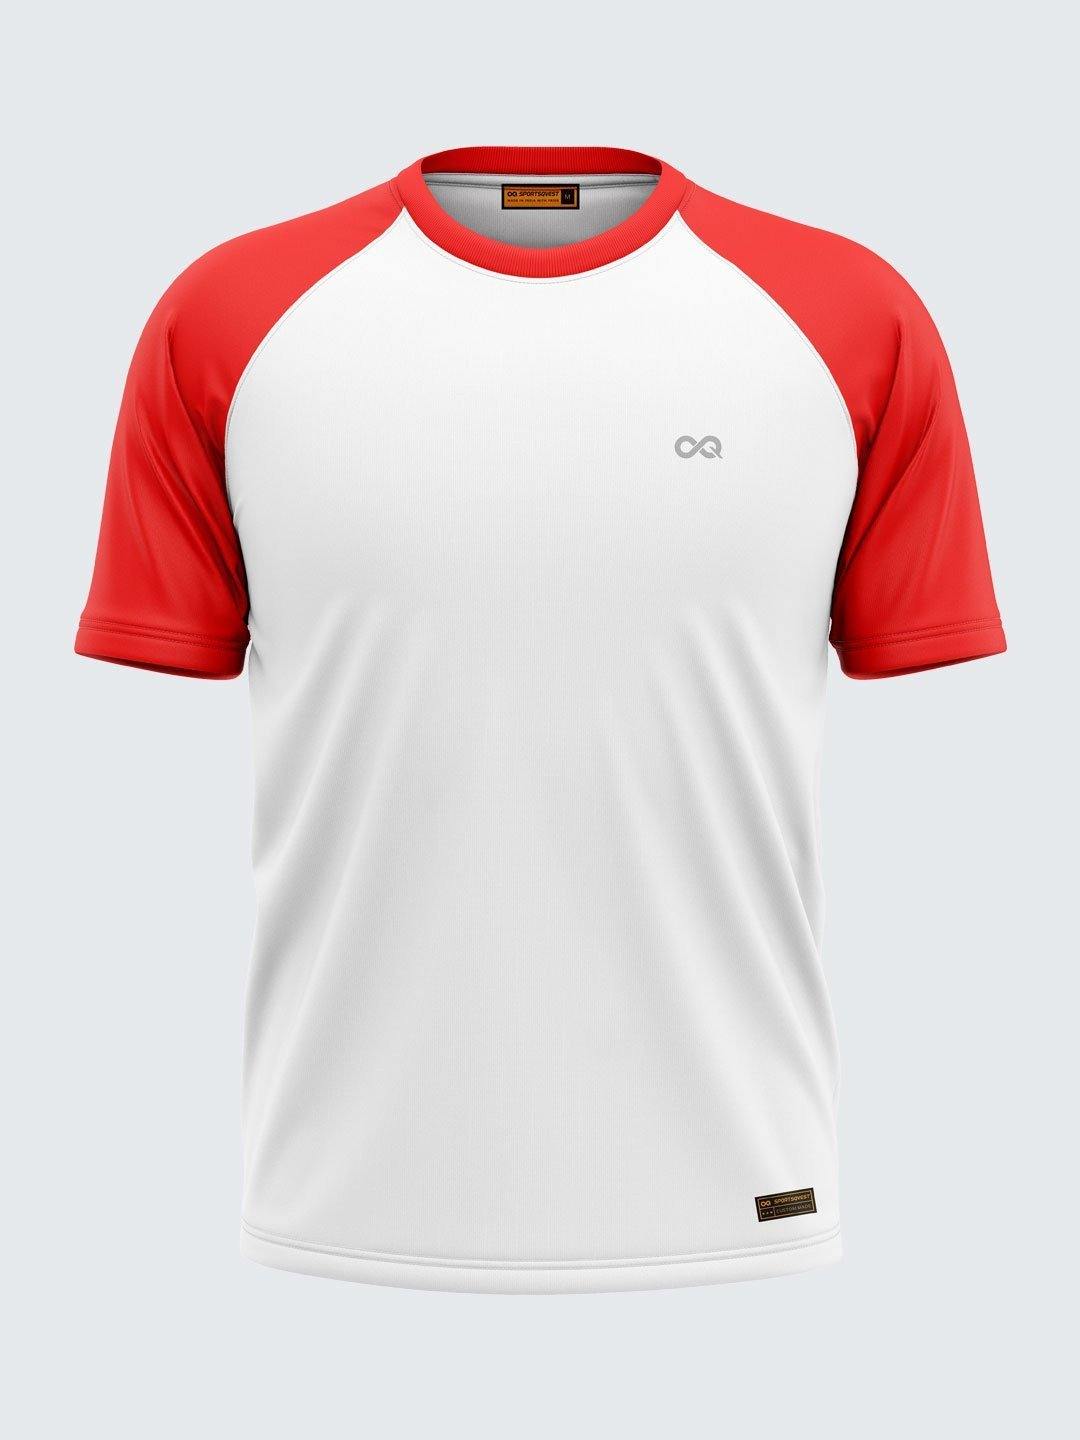 SXV Solid Dual Color Raglan Sleeve T-Shirt for Men (Red-White)